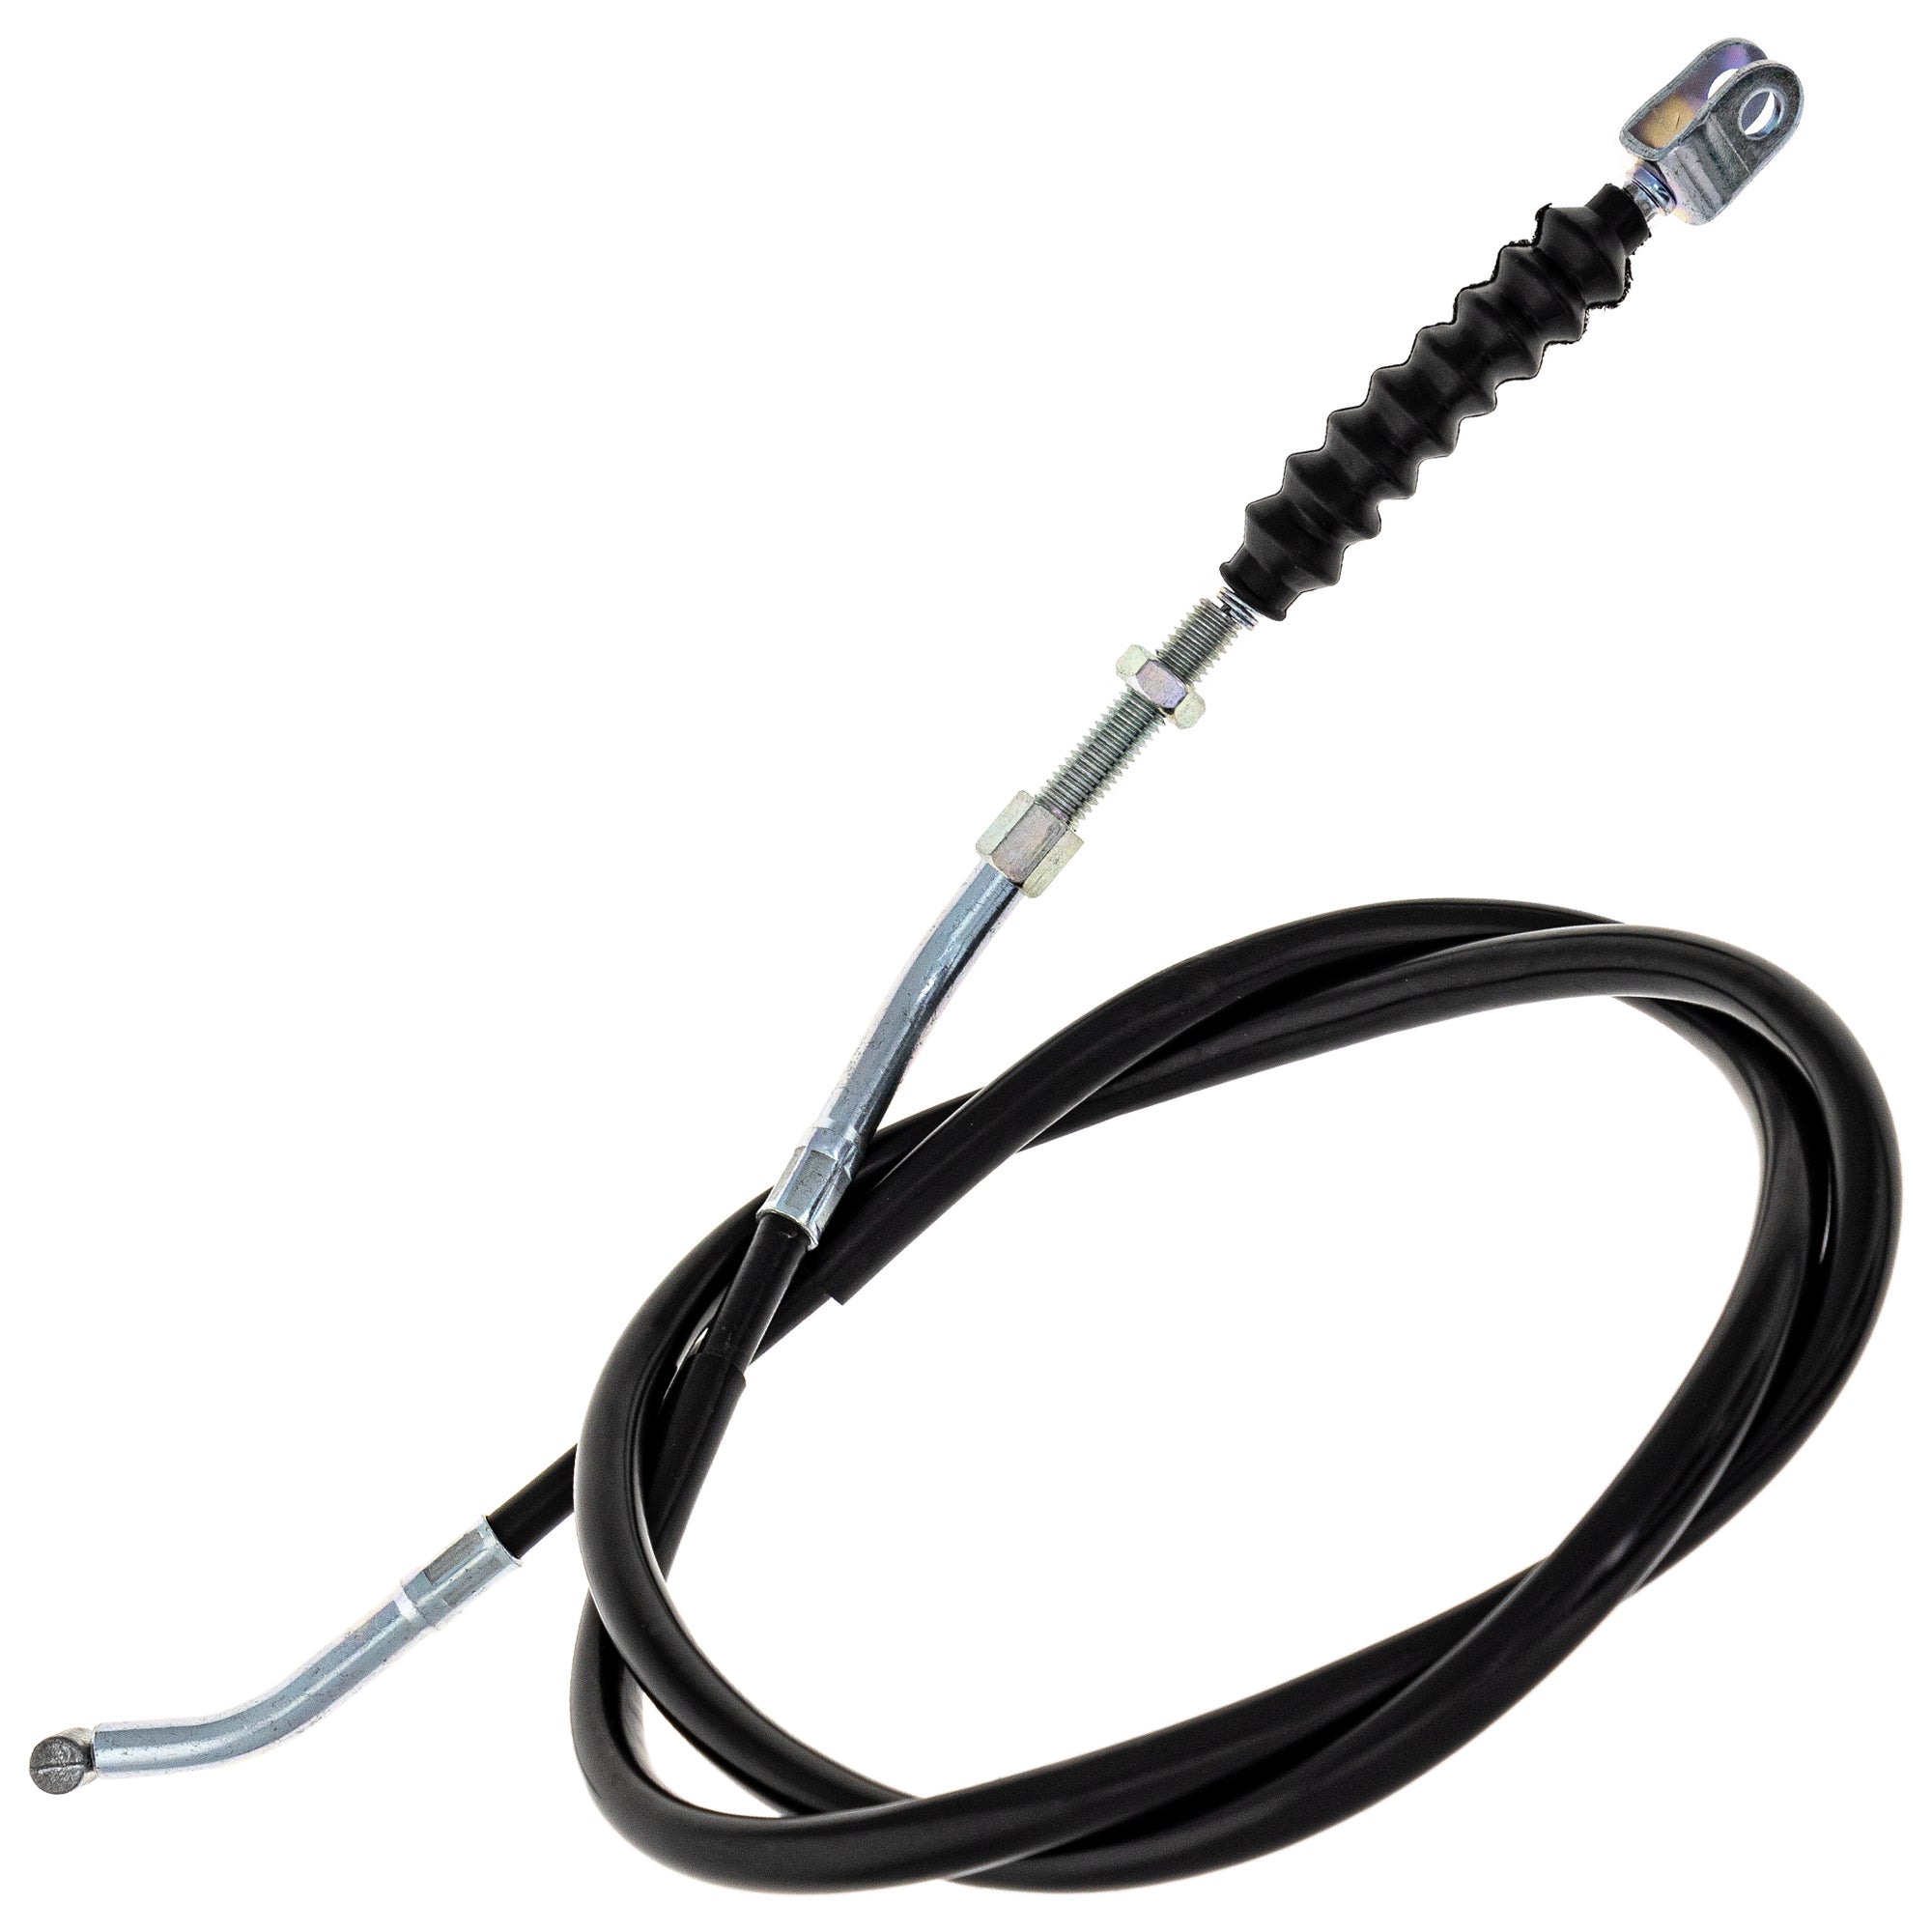 Clutch Cable for Suzuki GSXR750 49-State CA Motorcycle